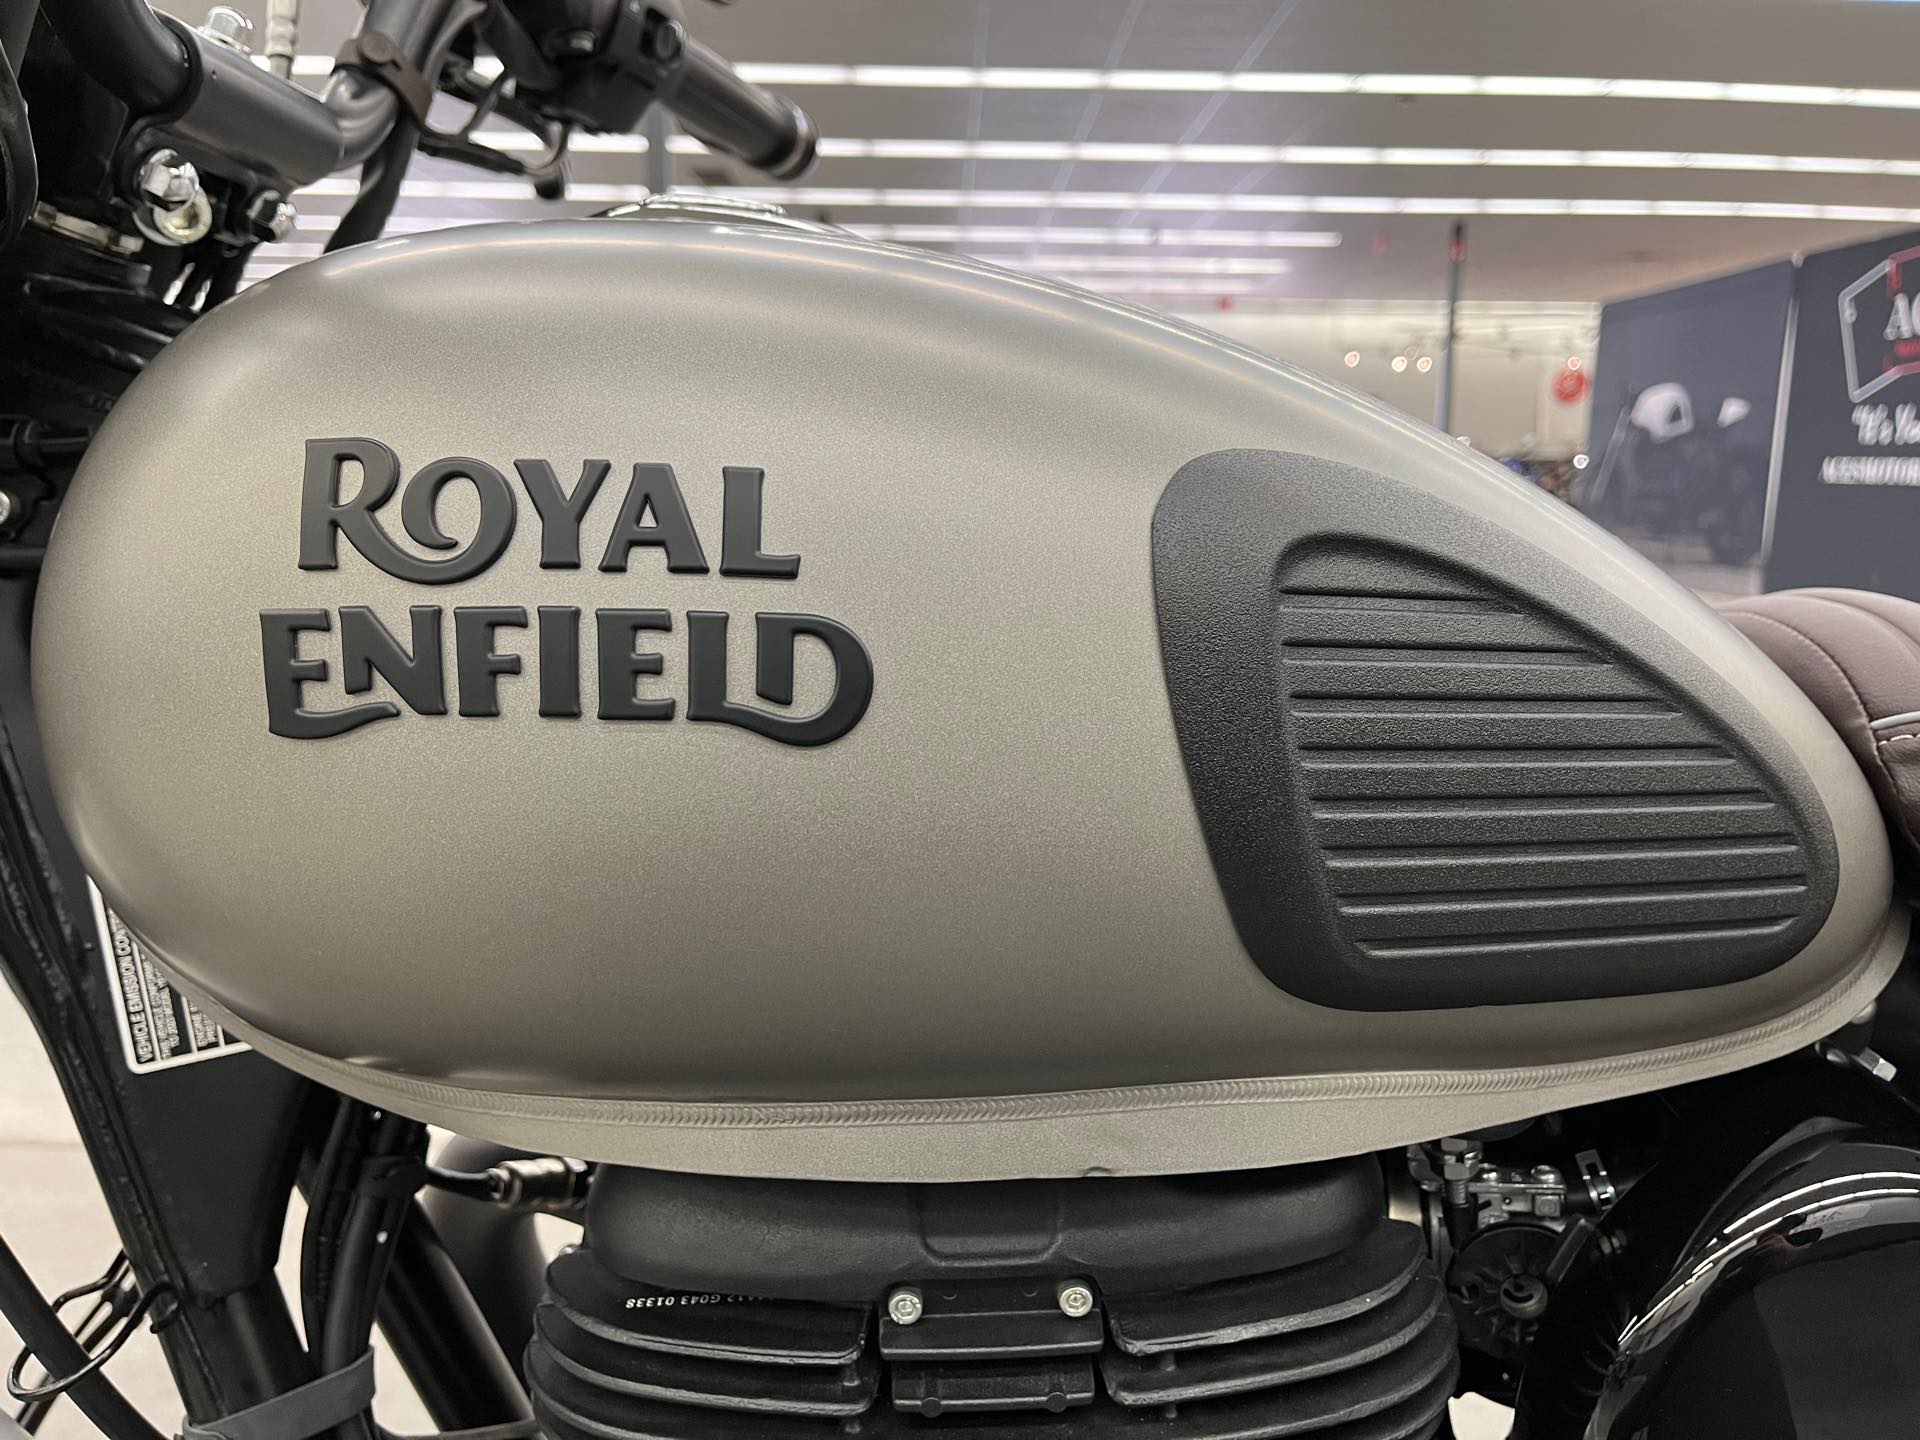 2023 Royal Enfield Classic 350 at Aces Motorcycles - Denver